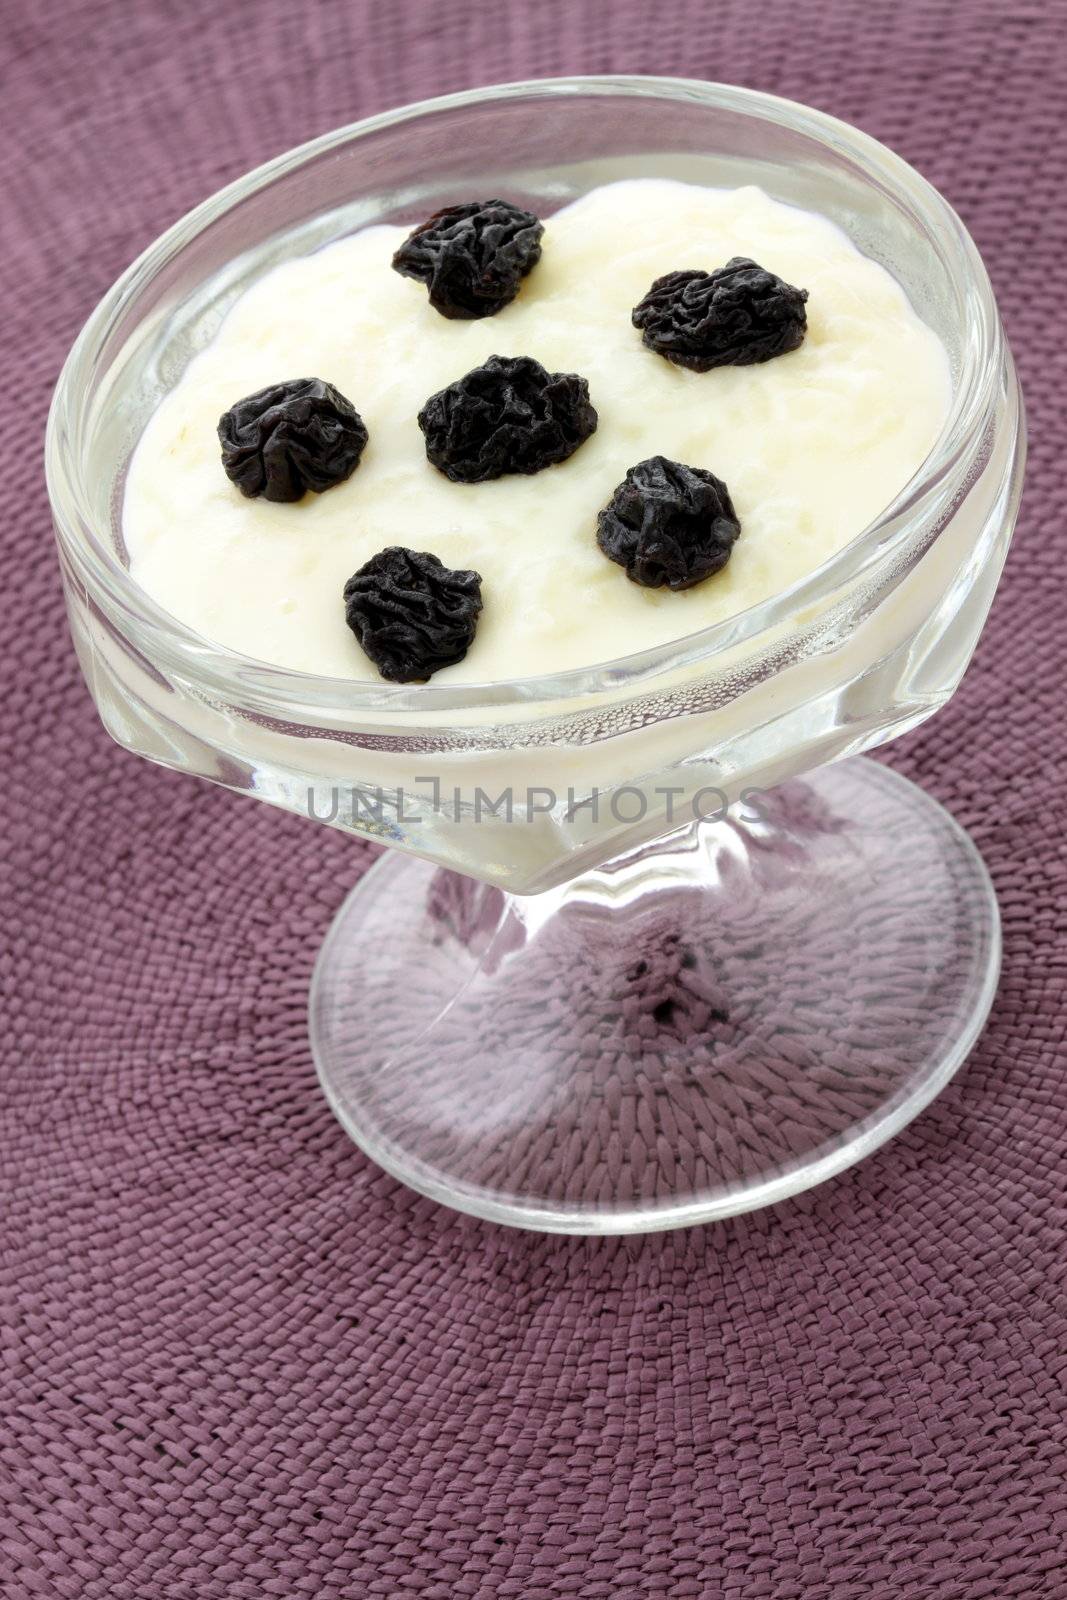 delicious just made warm rice pudding with cinnamon, raisins or brown sugar on top one of the most delicious desserts ever 